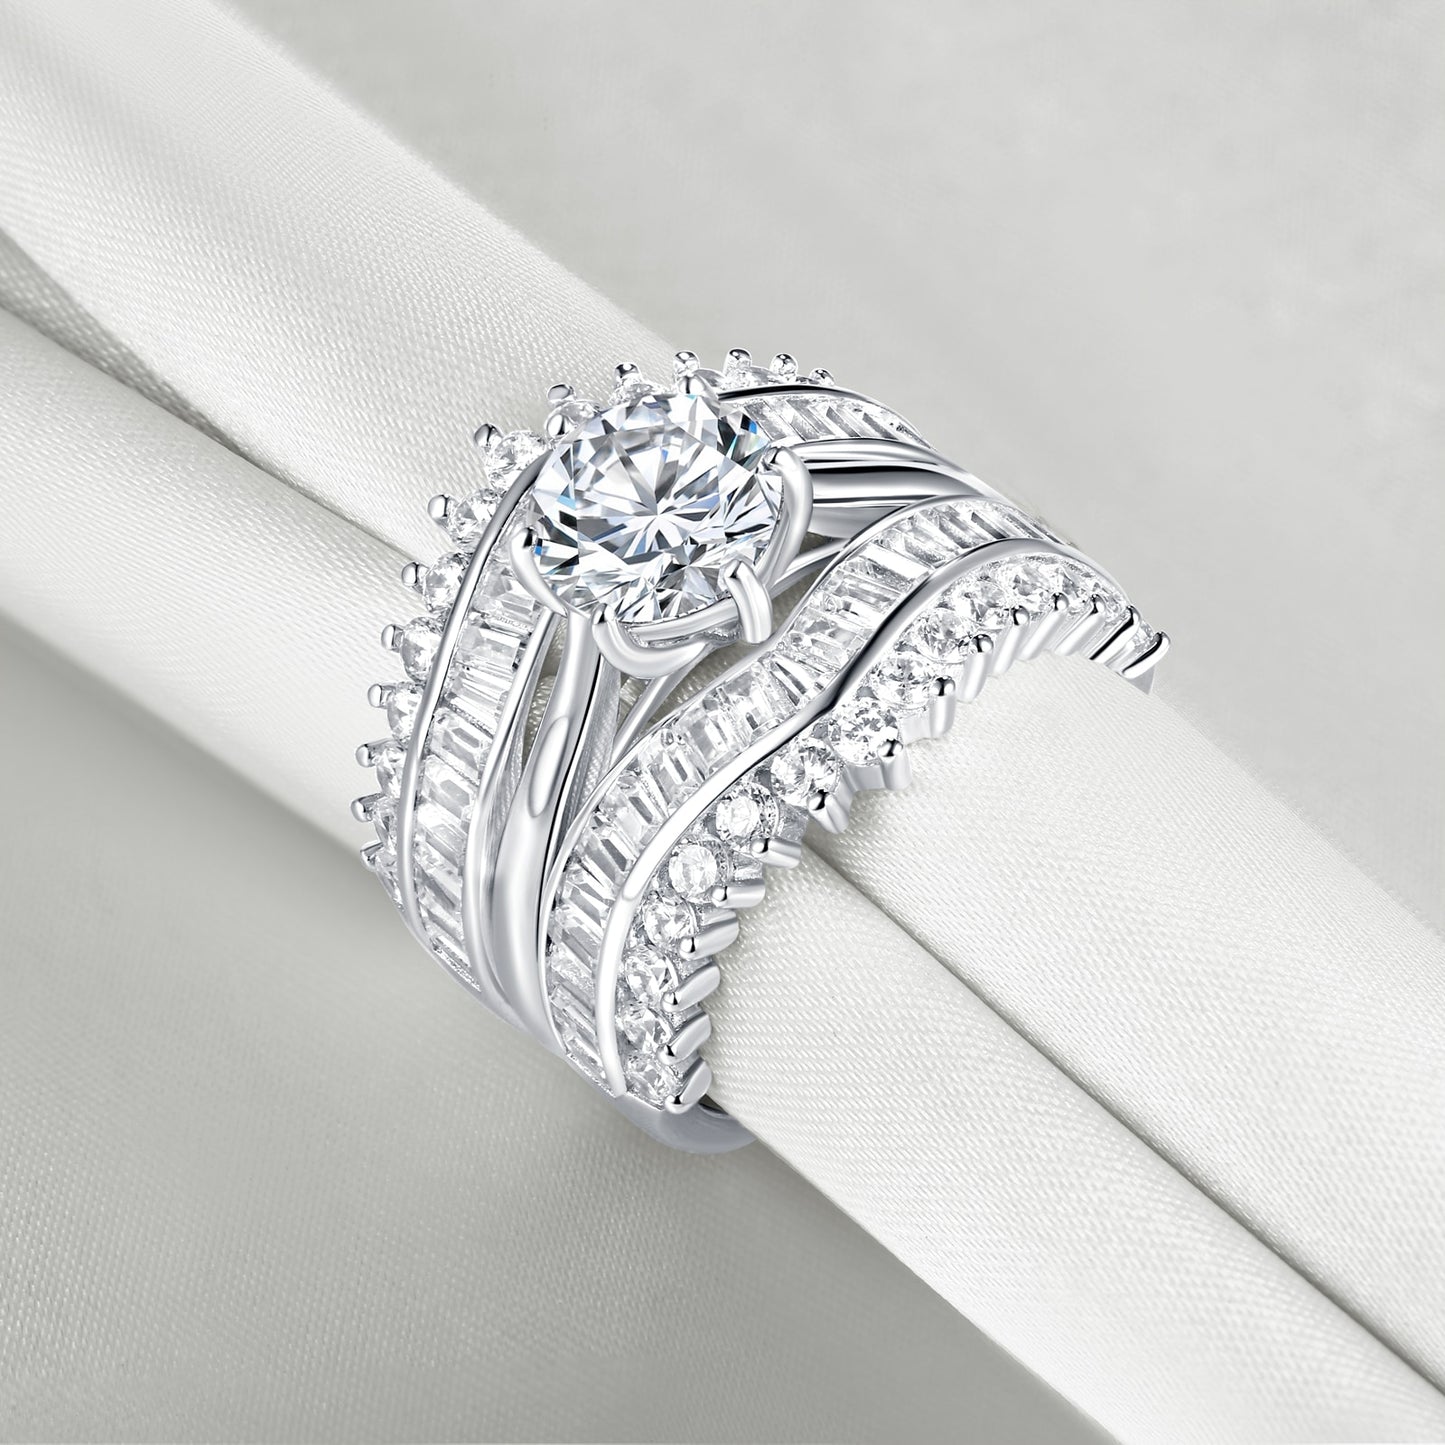 Diamond Silver Solitaire Round Cut Engagement Ring Set